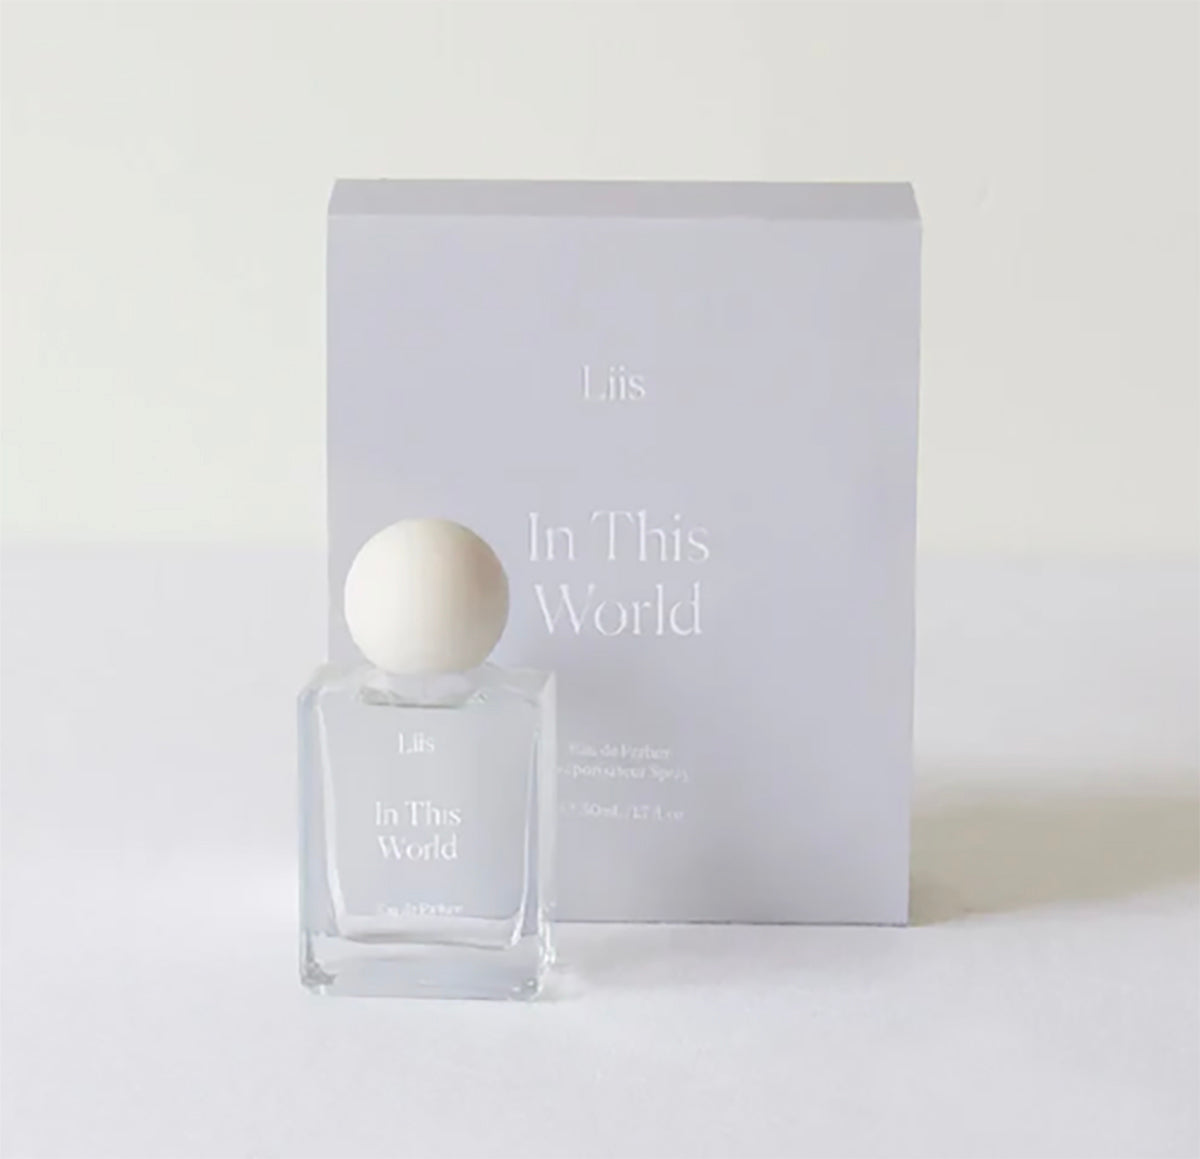 In This World, a Perfume by Liis, available at Indigo